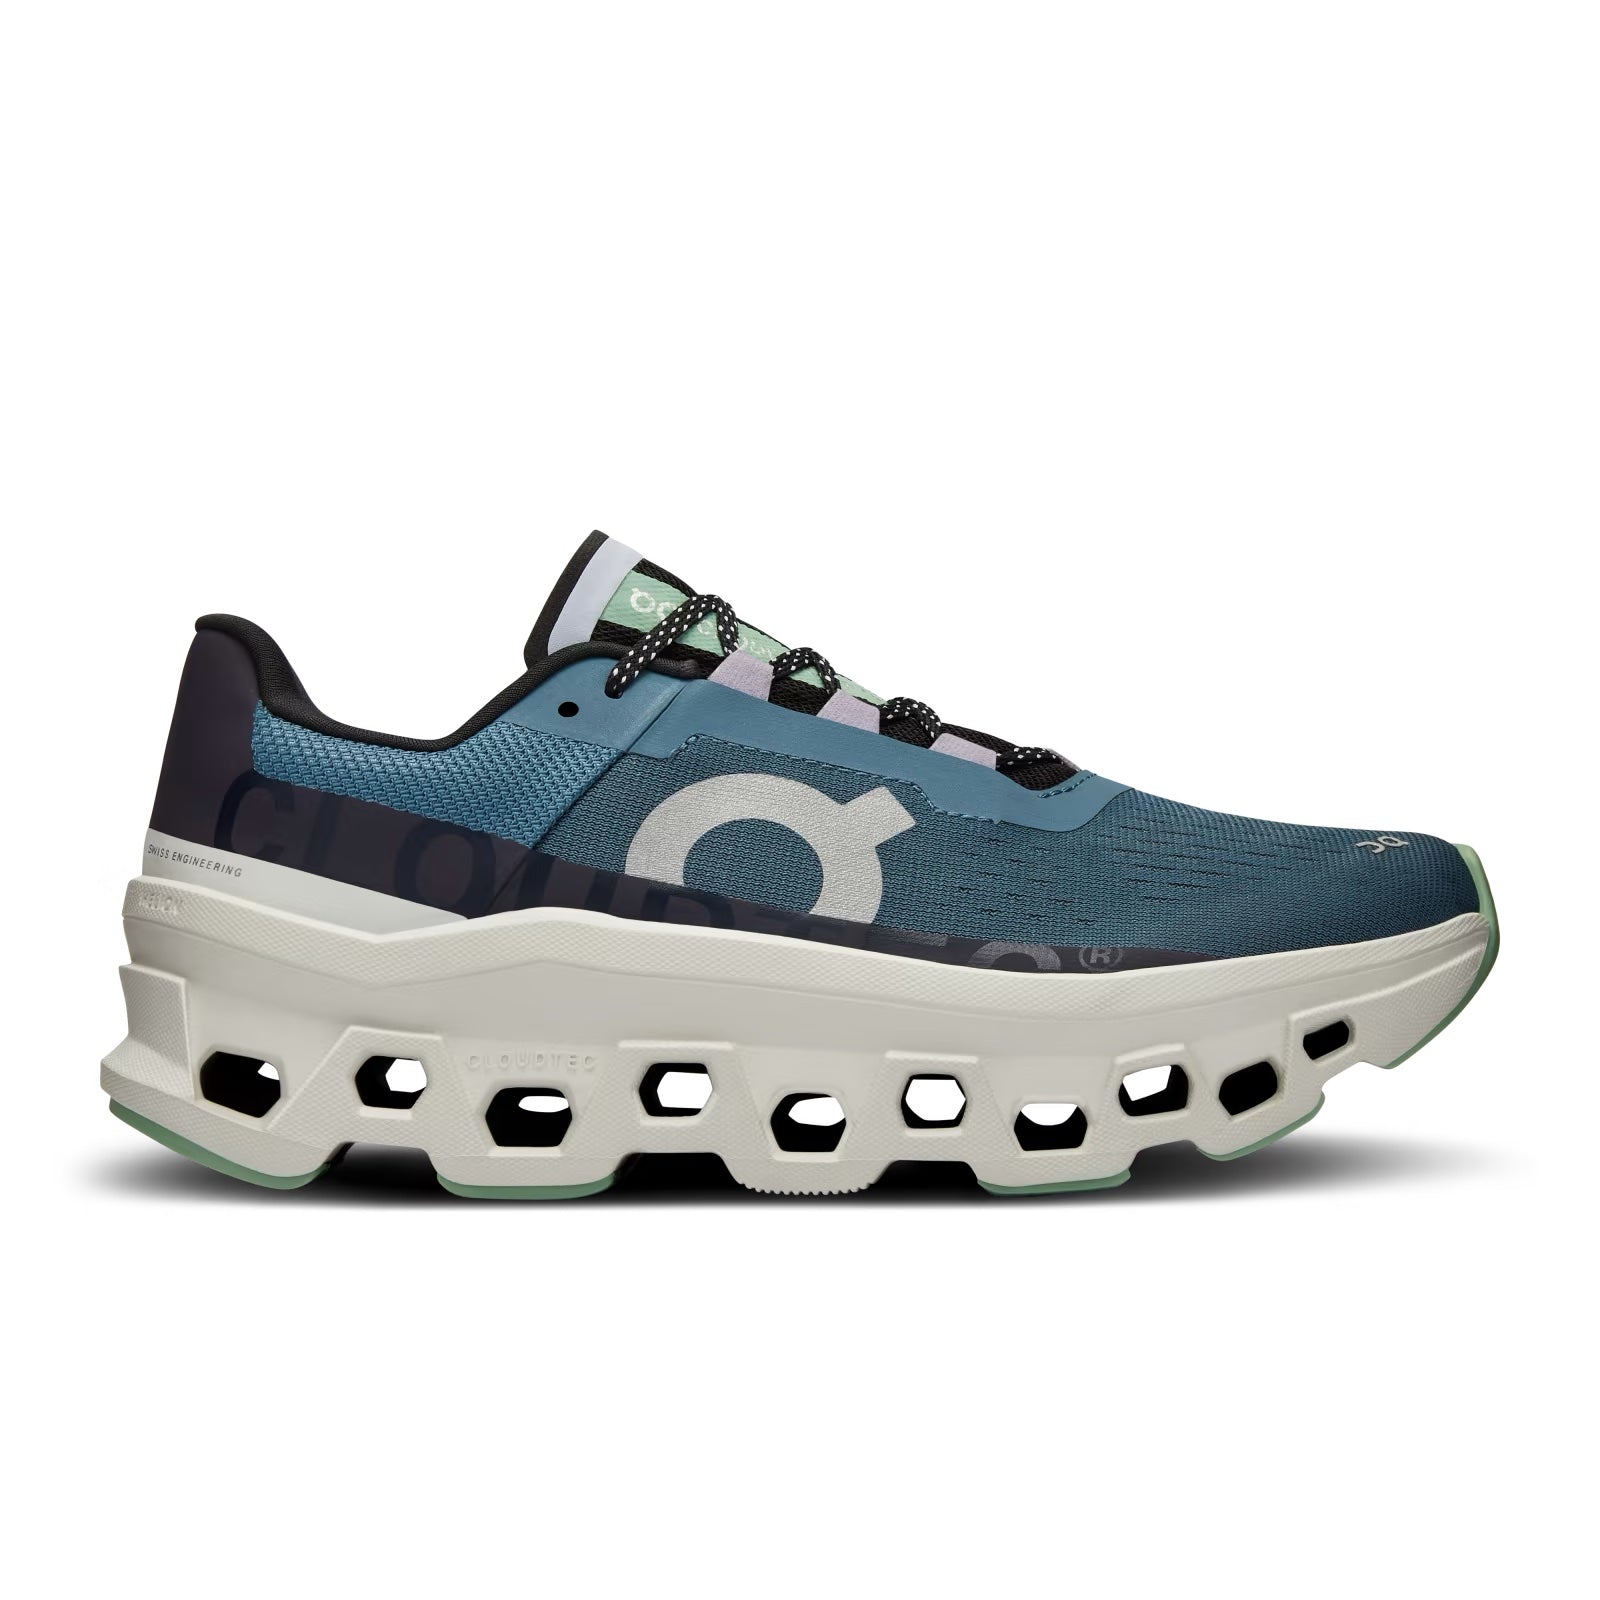 Women's Cloudmonster – Midland Athletic Company